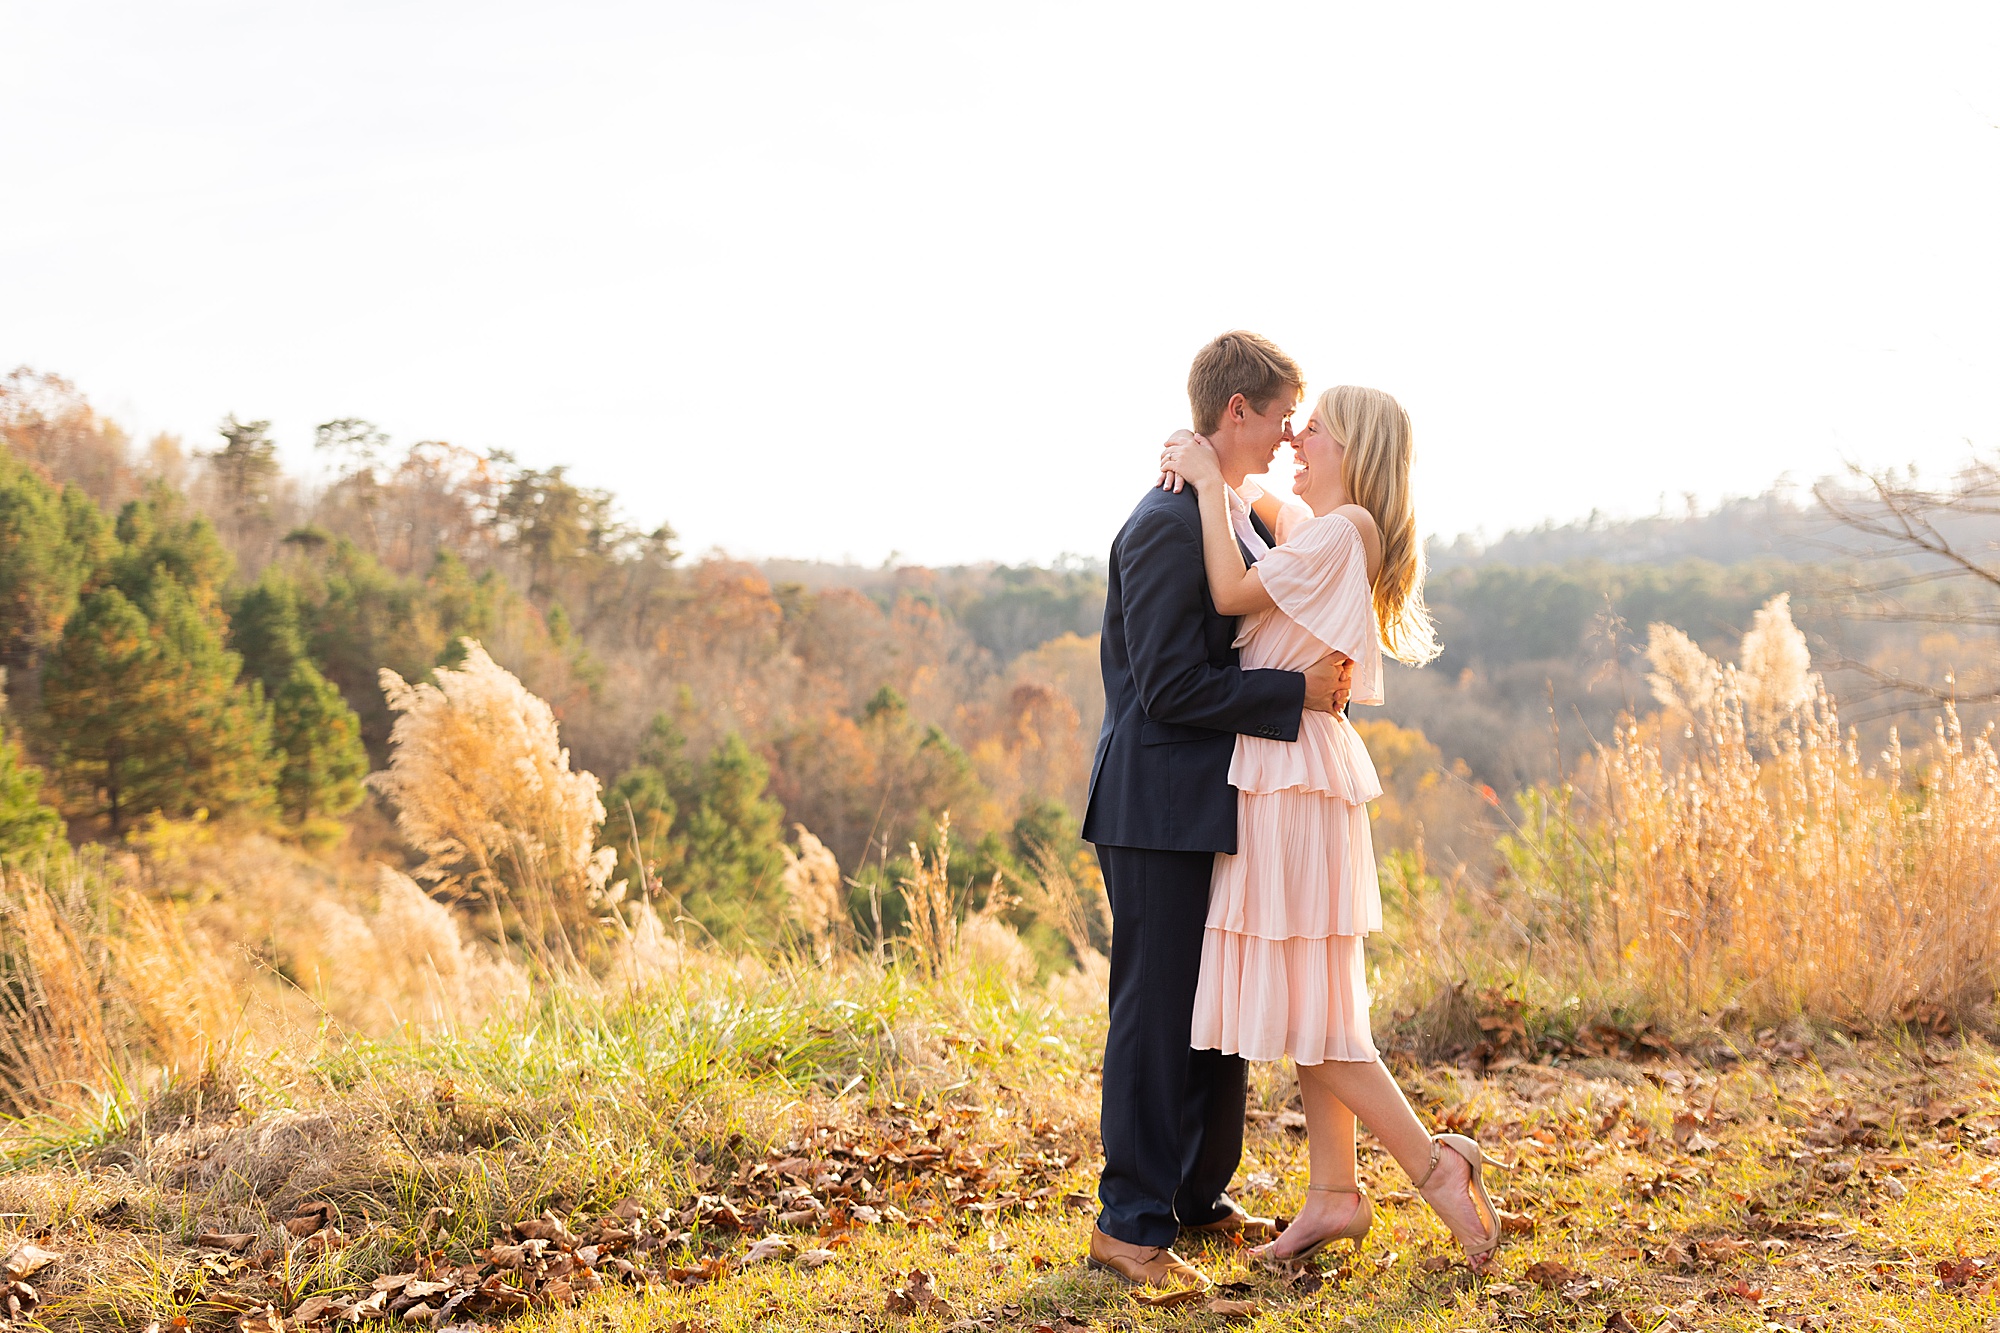 Eleanor Stenner Photography - a Birmingham, Alabama wedding photographer - shares how to plan the perfect proposal